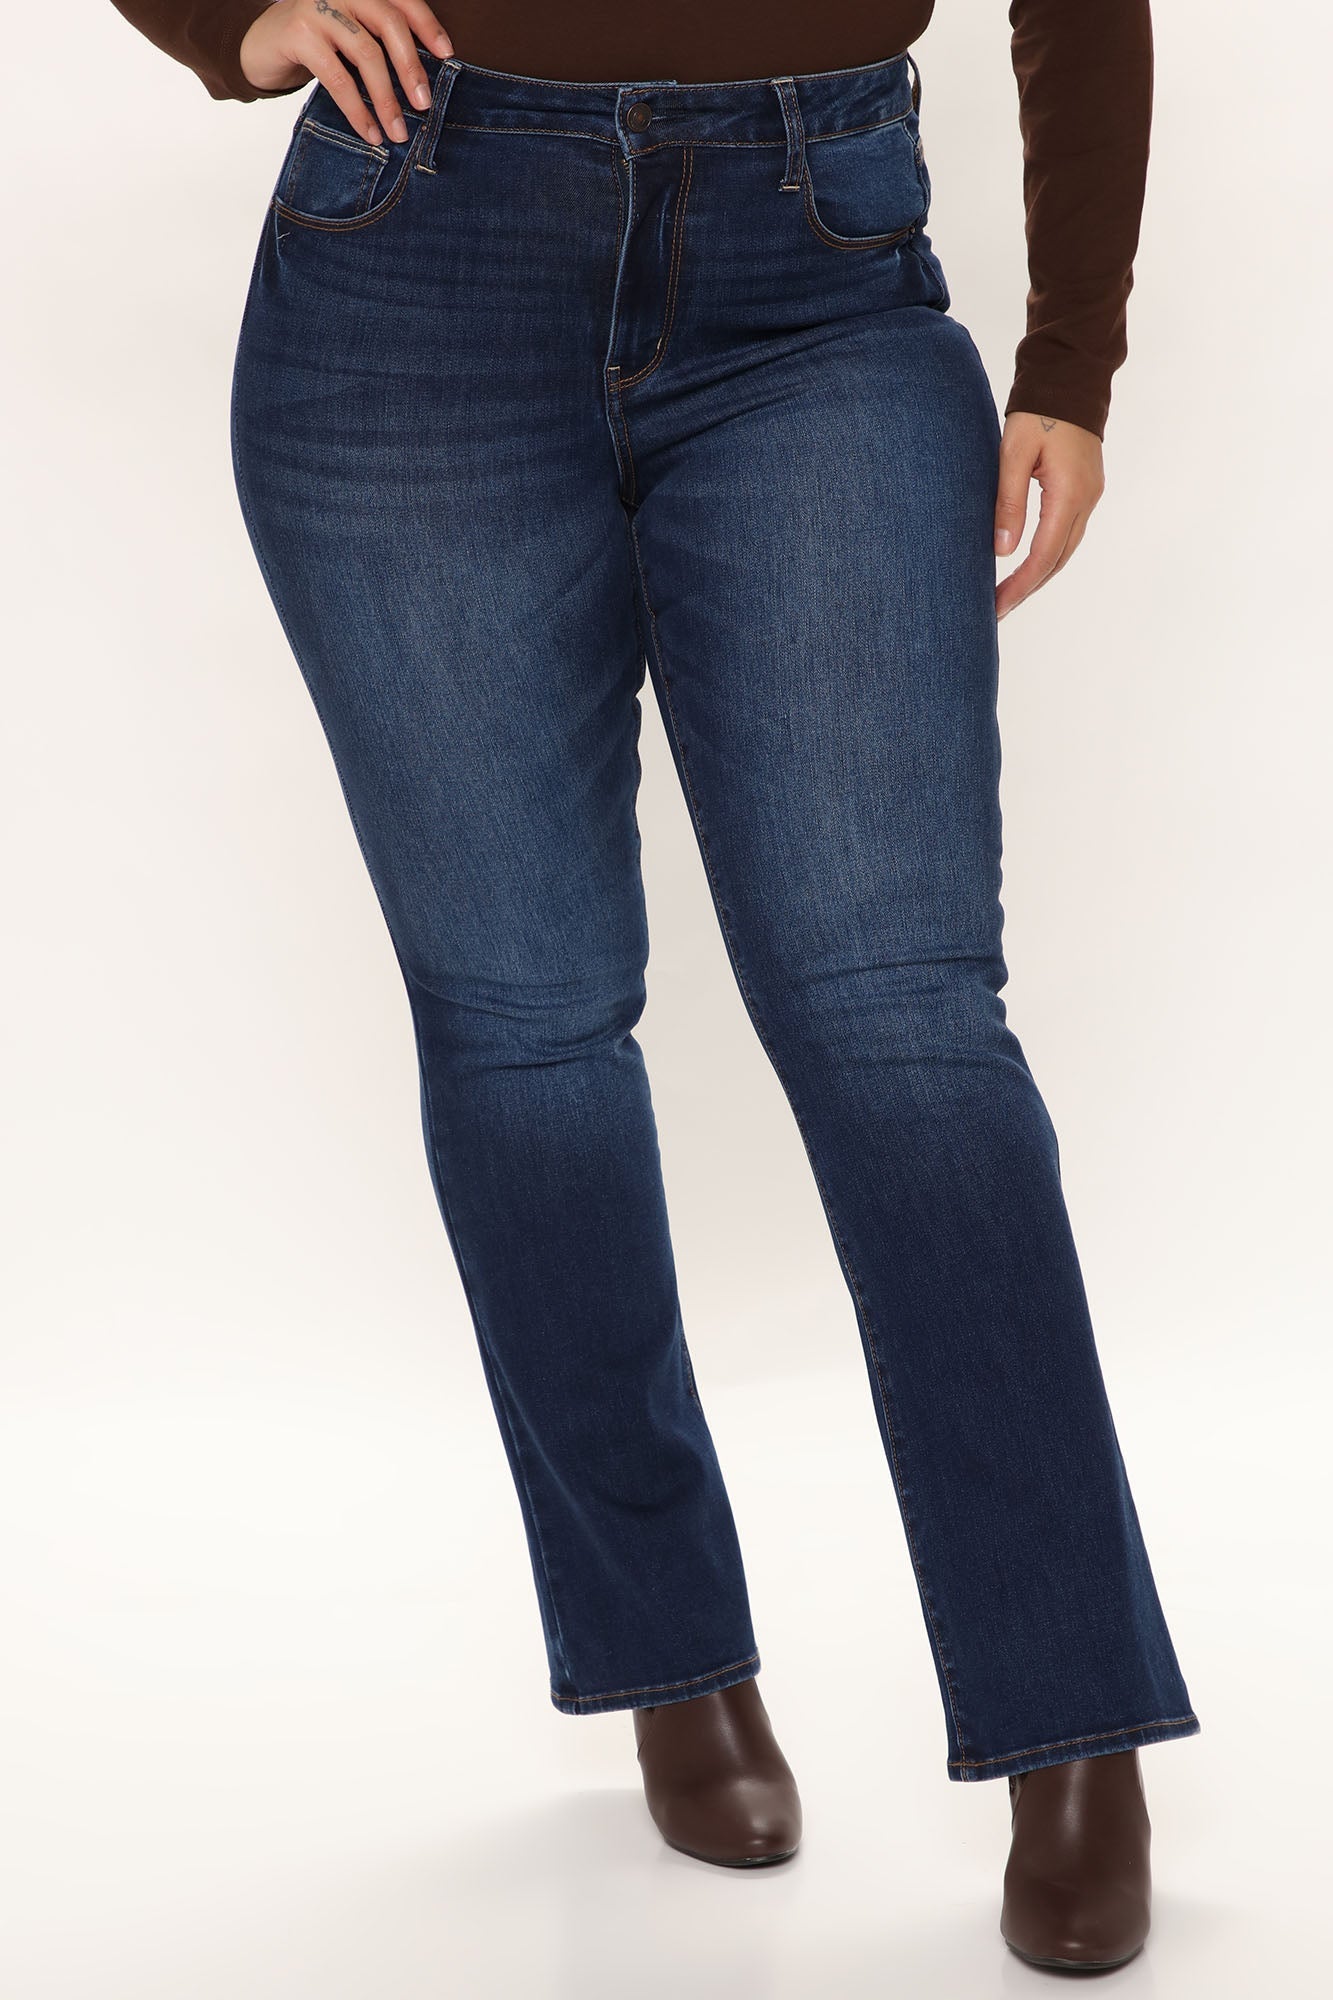 In The Groove High Rise Bootcut Jeans - Dark Wash